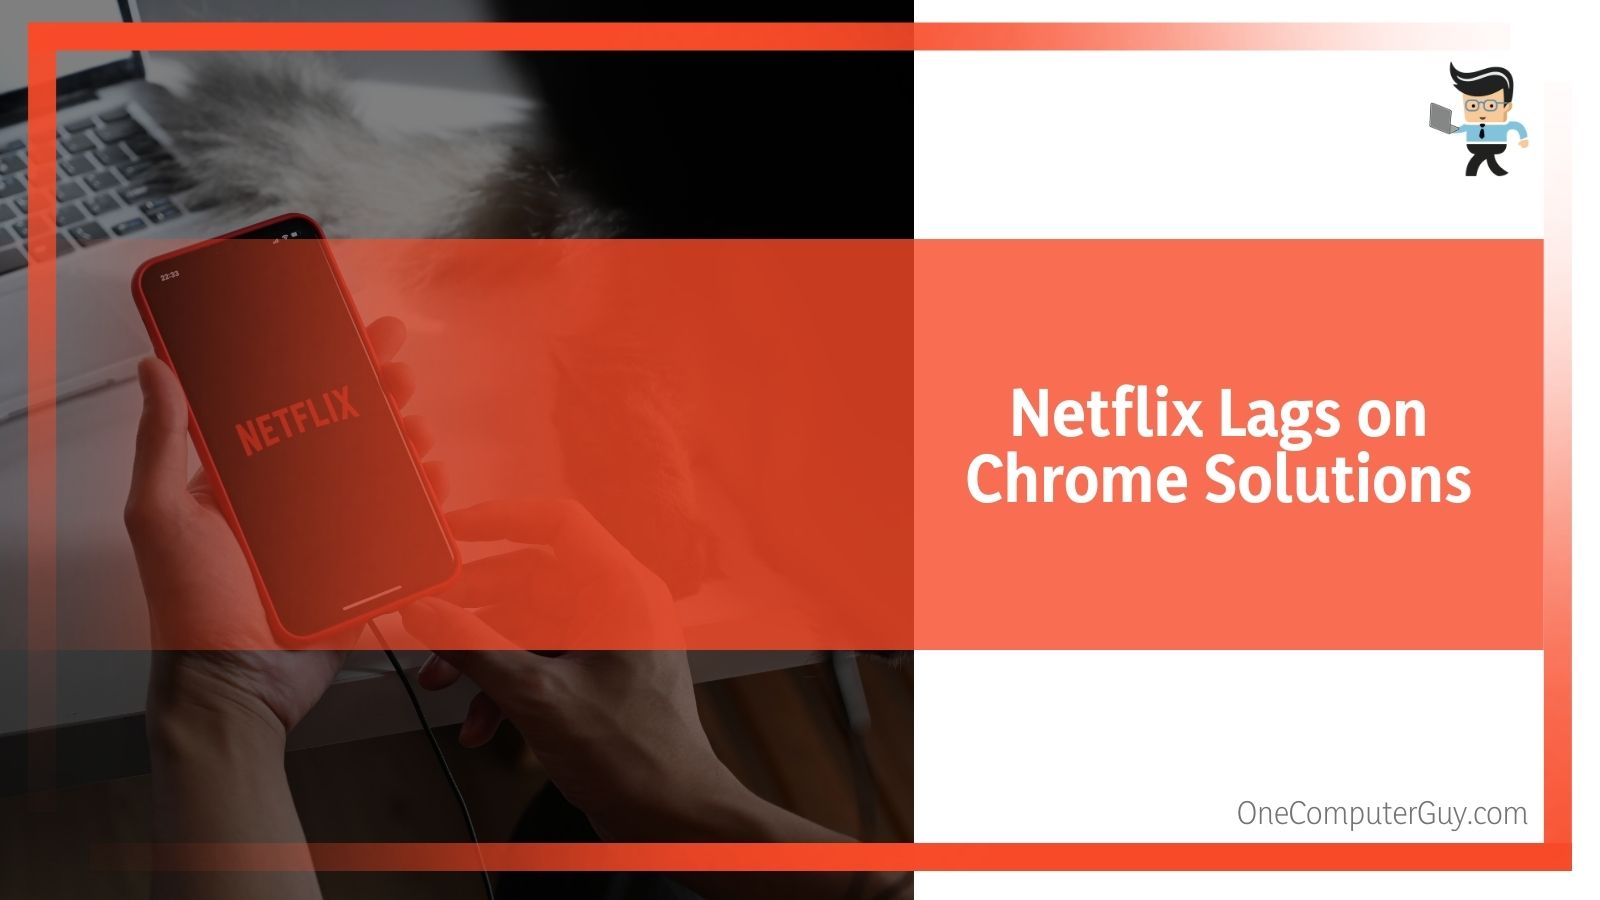 Netflix Lags on Chrome Solutions